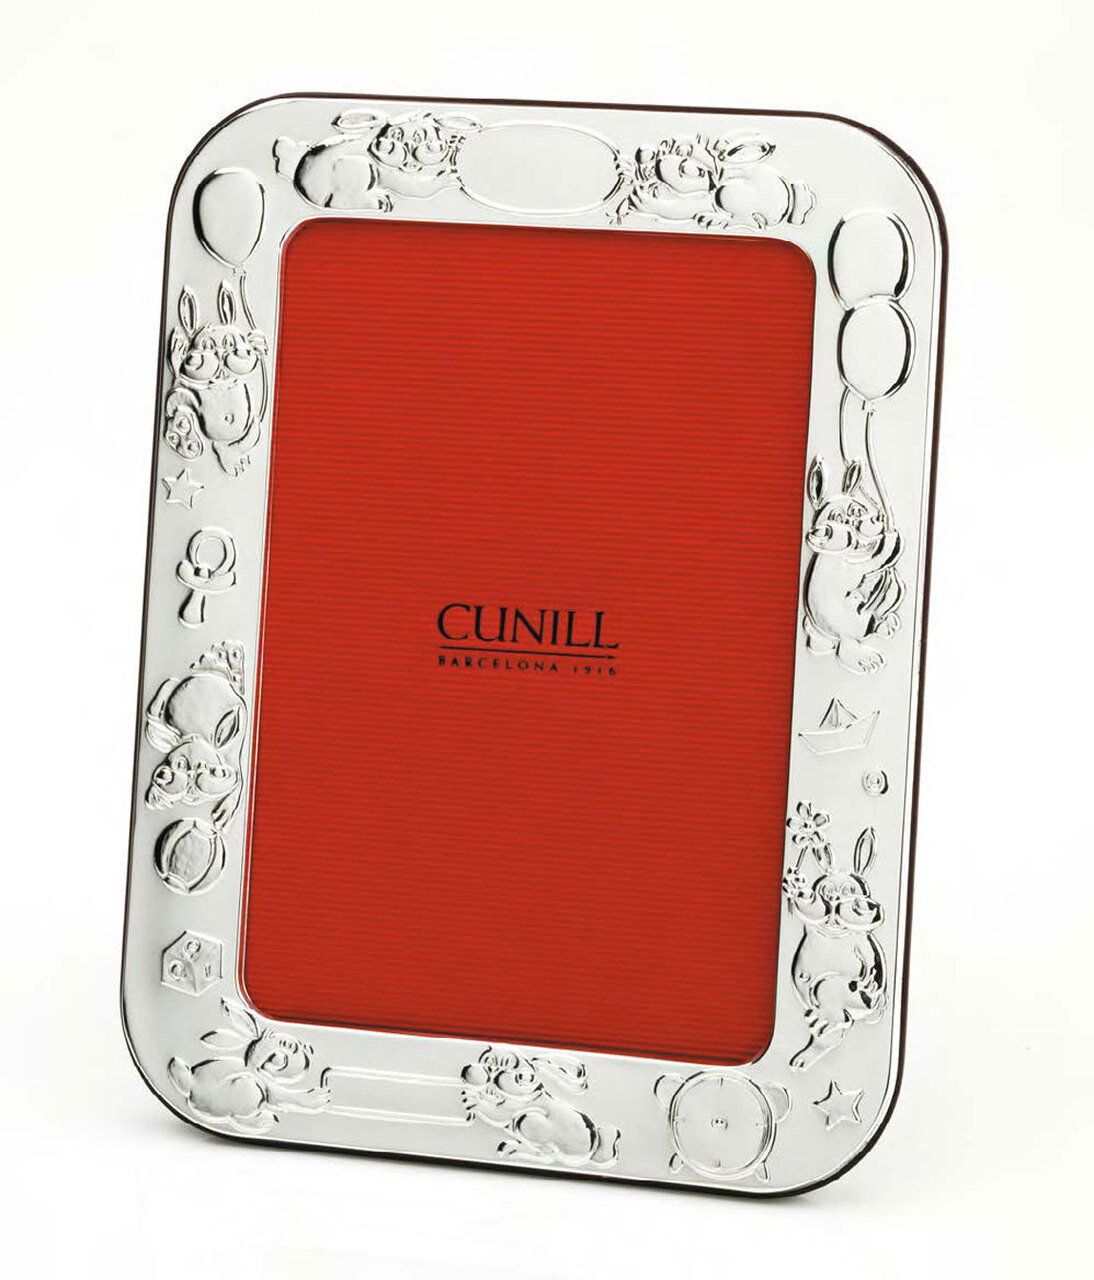 Cunill Bunnies Birth Record 4 x 6 Inch Picture Frame - Sterling Silver